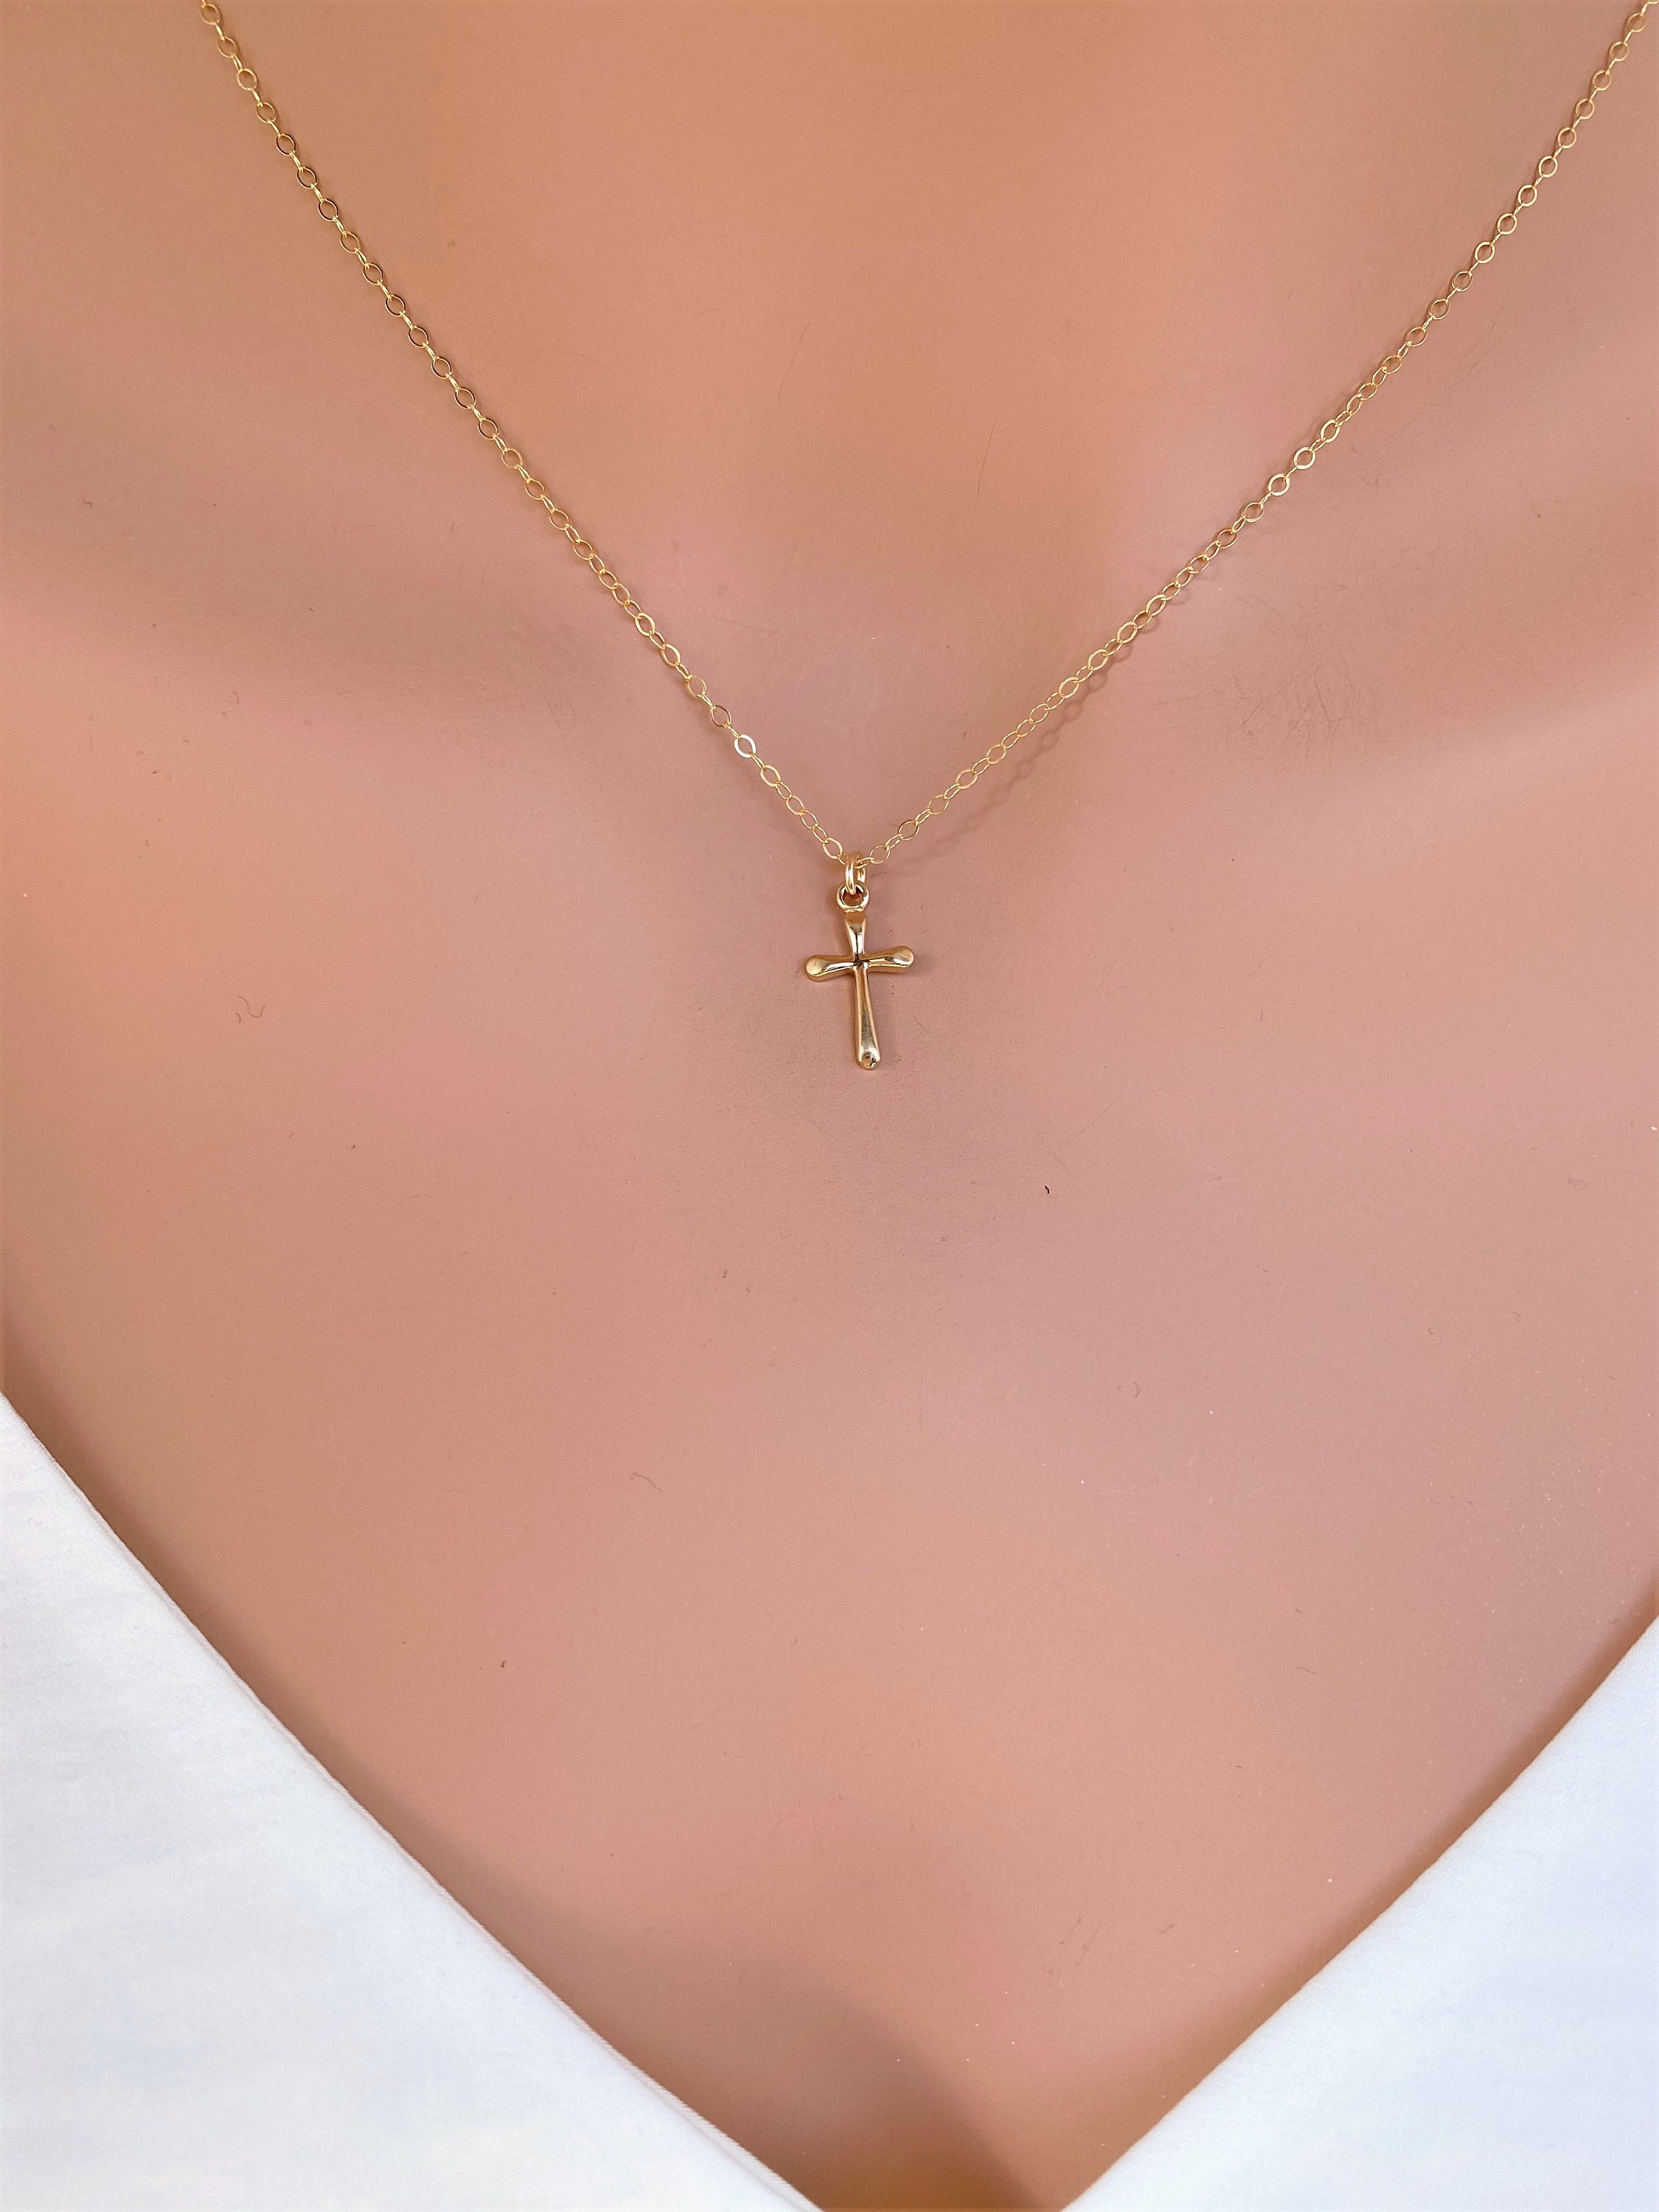 Celtic Gold Cross Pendant, Gold Cross Necklace by Proclamation Jewelry